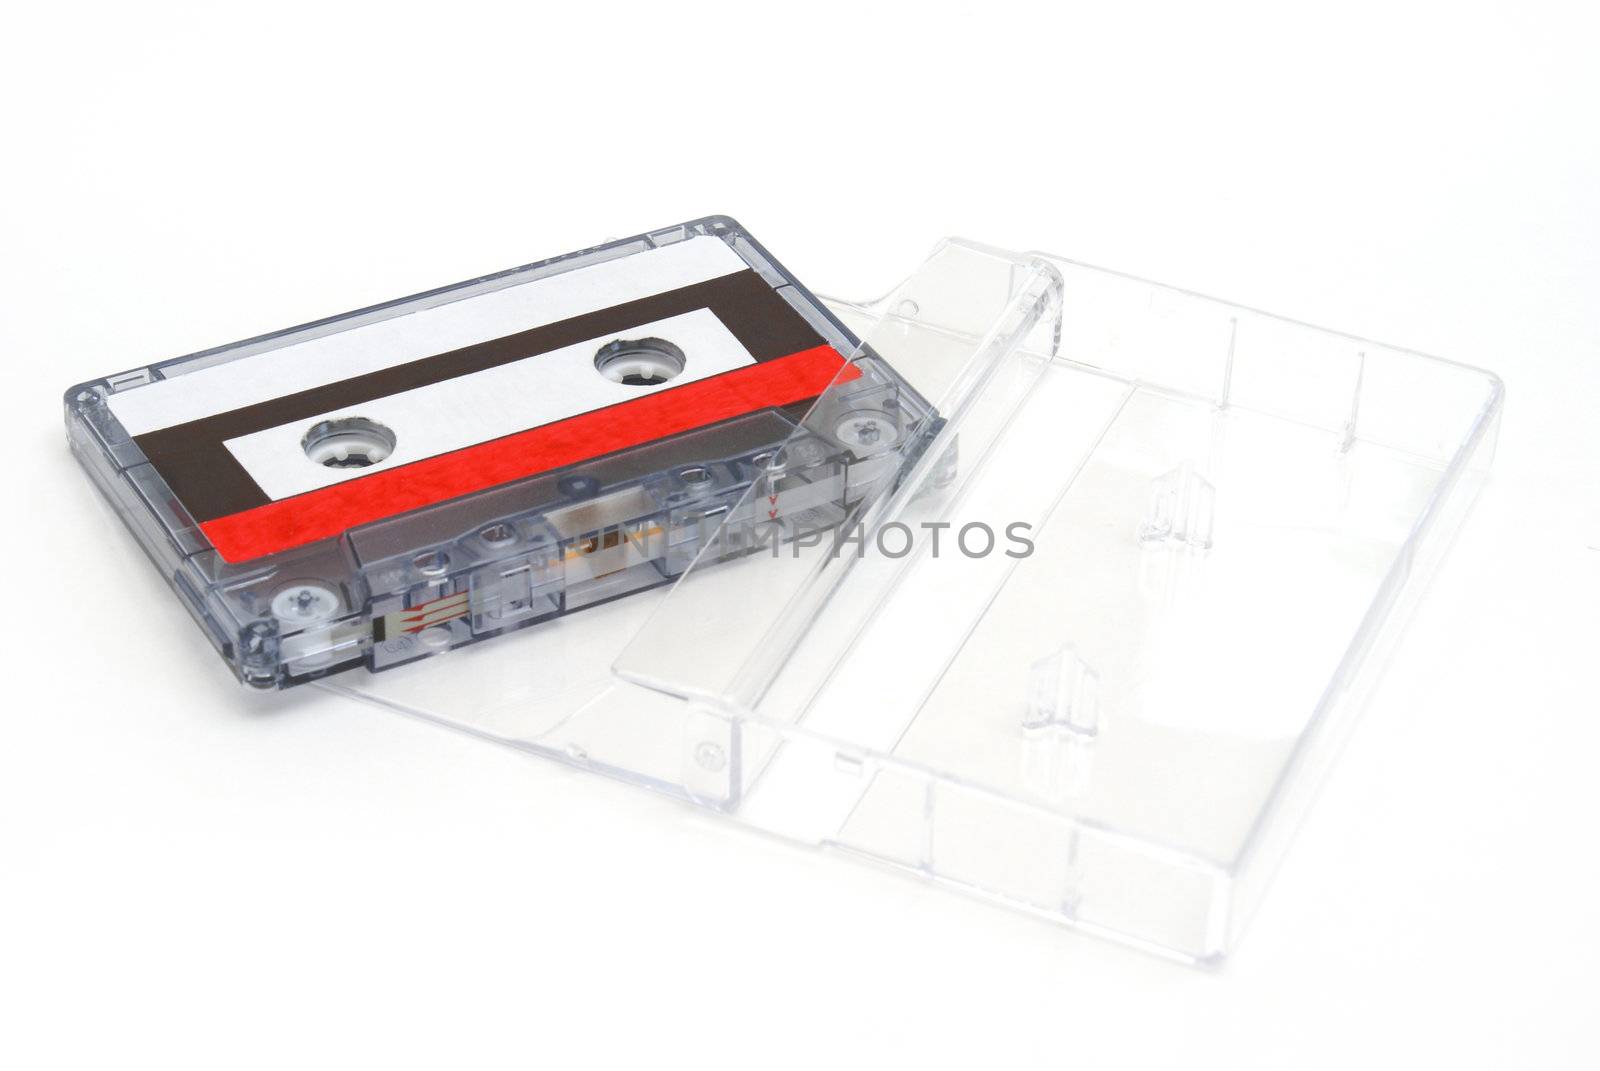 A cassette tape with its case on white background.